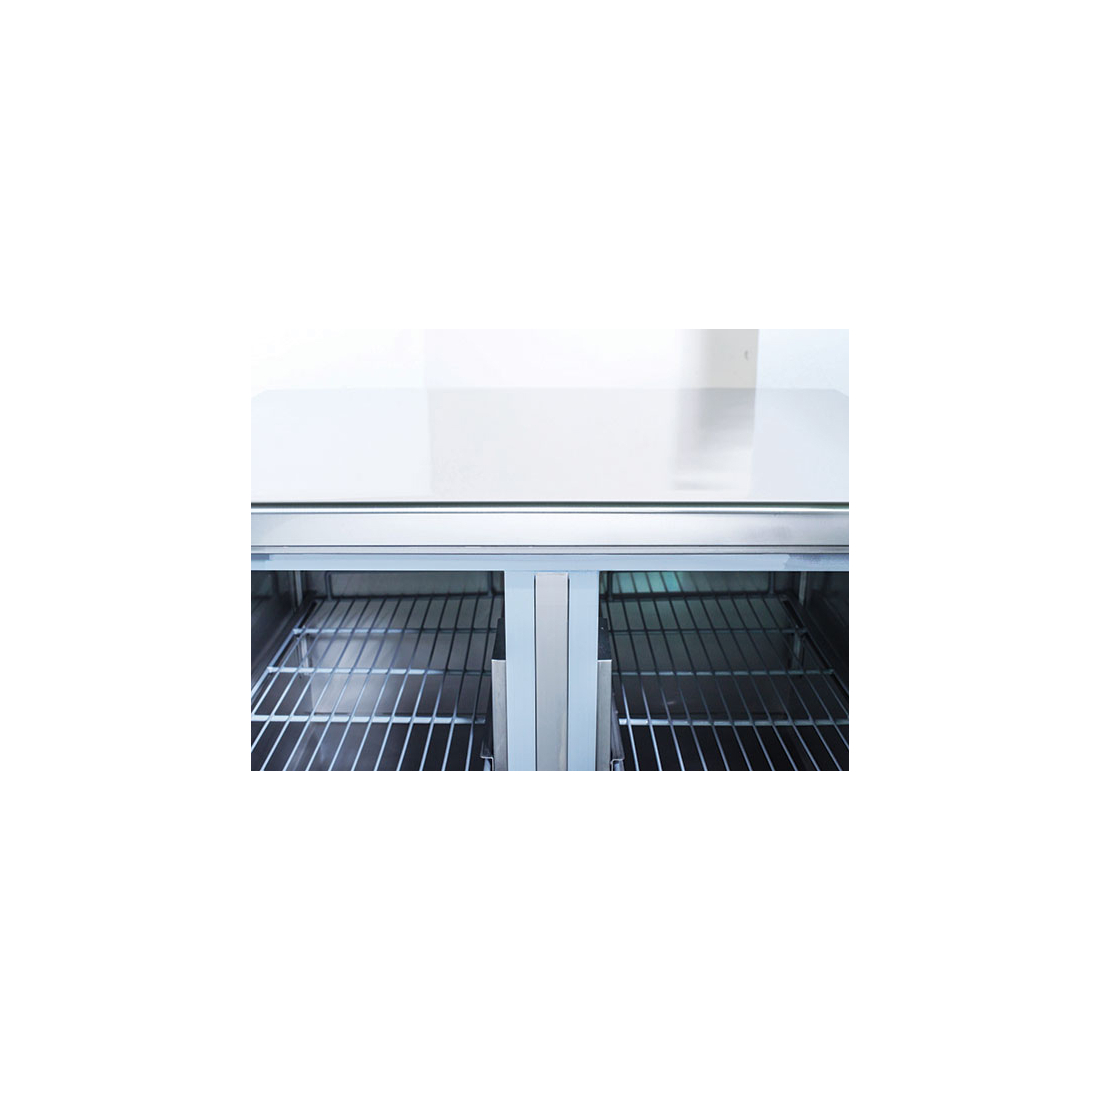 COOL HEAD ,CRQ90A, Sandwich and Salad Prep Refrigerator with Two Doors and Curved Display Glass|mkayn|مكاين